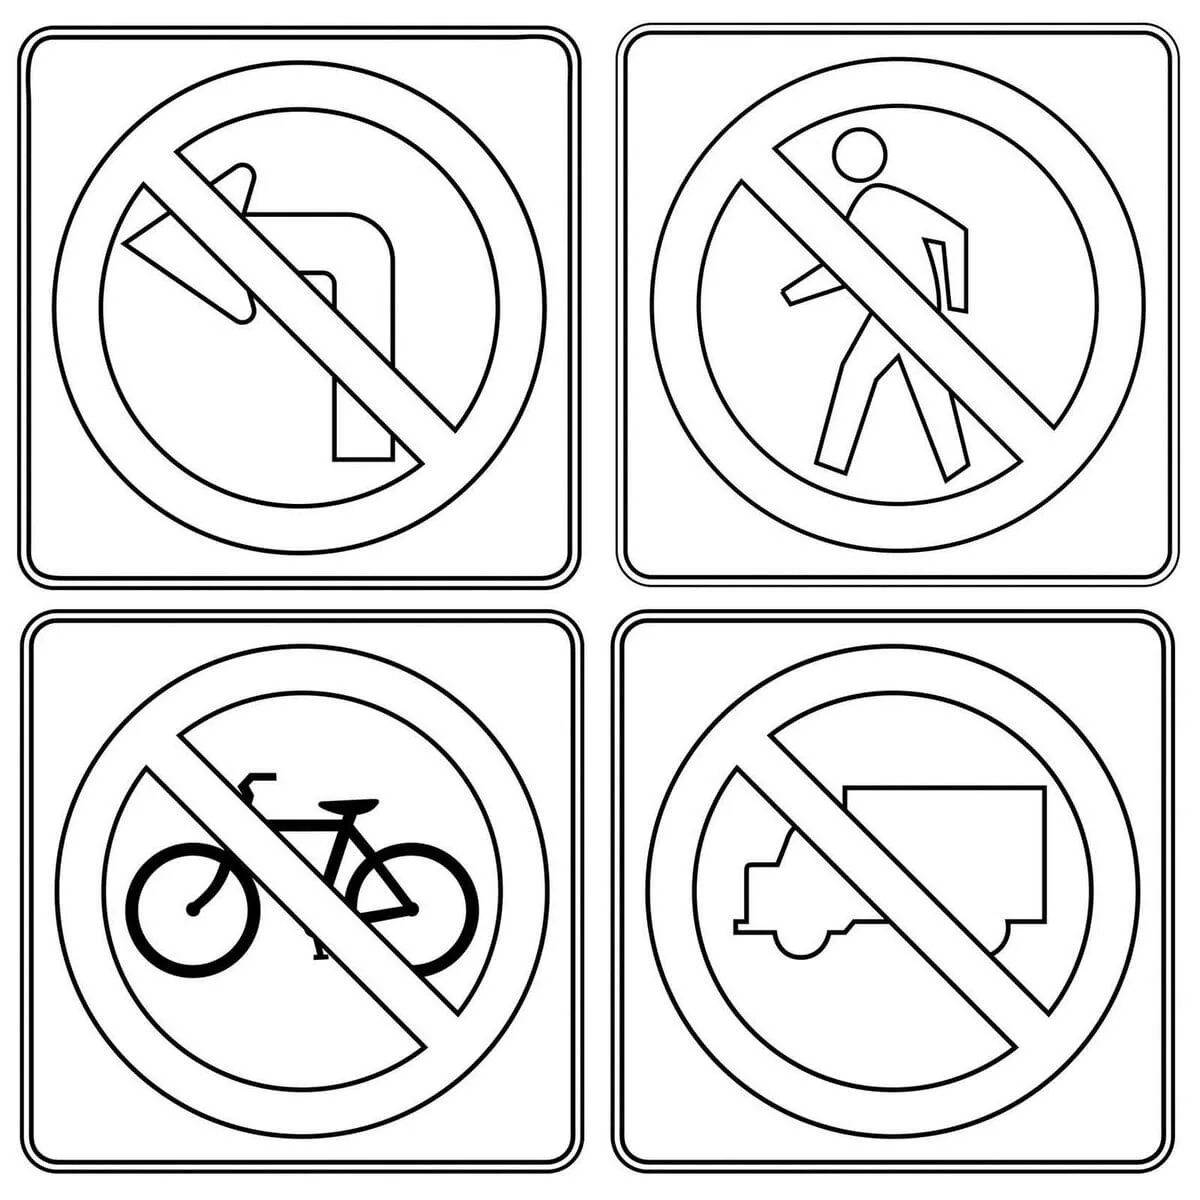 Coloring page amazing no traffic sign